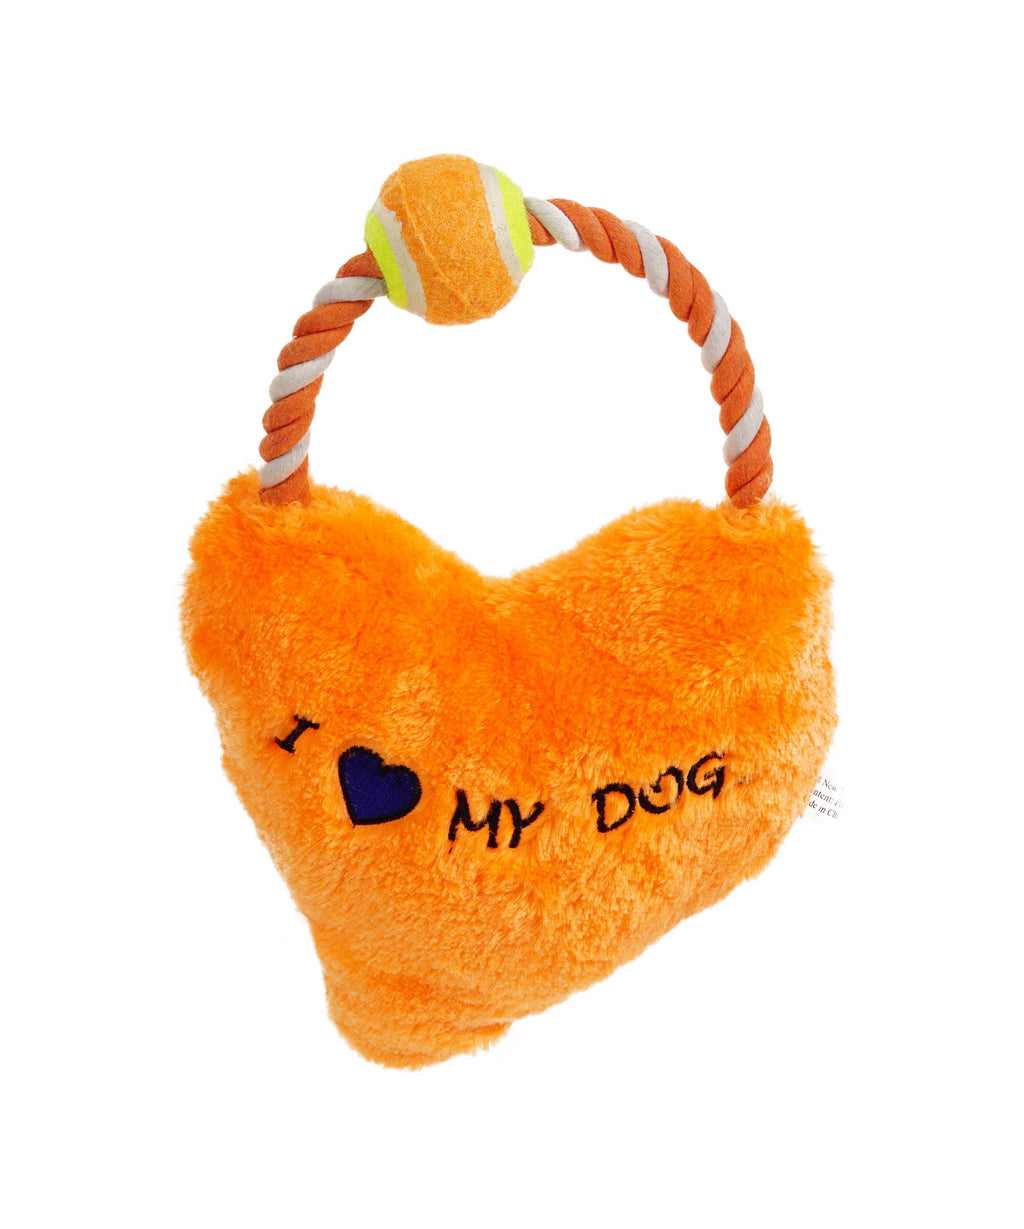 Orange Soft Plush Tug Toy with Rope Arch Attached with Tennis Ball Around Rope Labeled I heart My Dog 